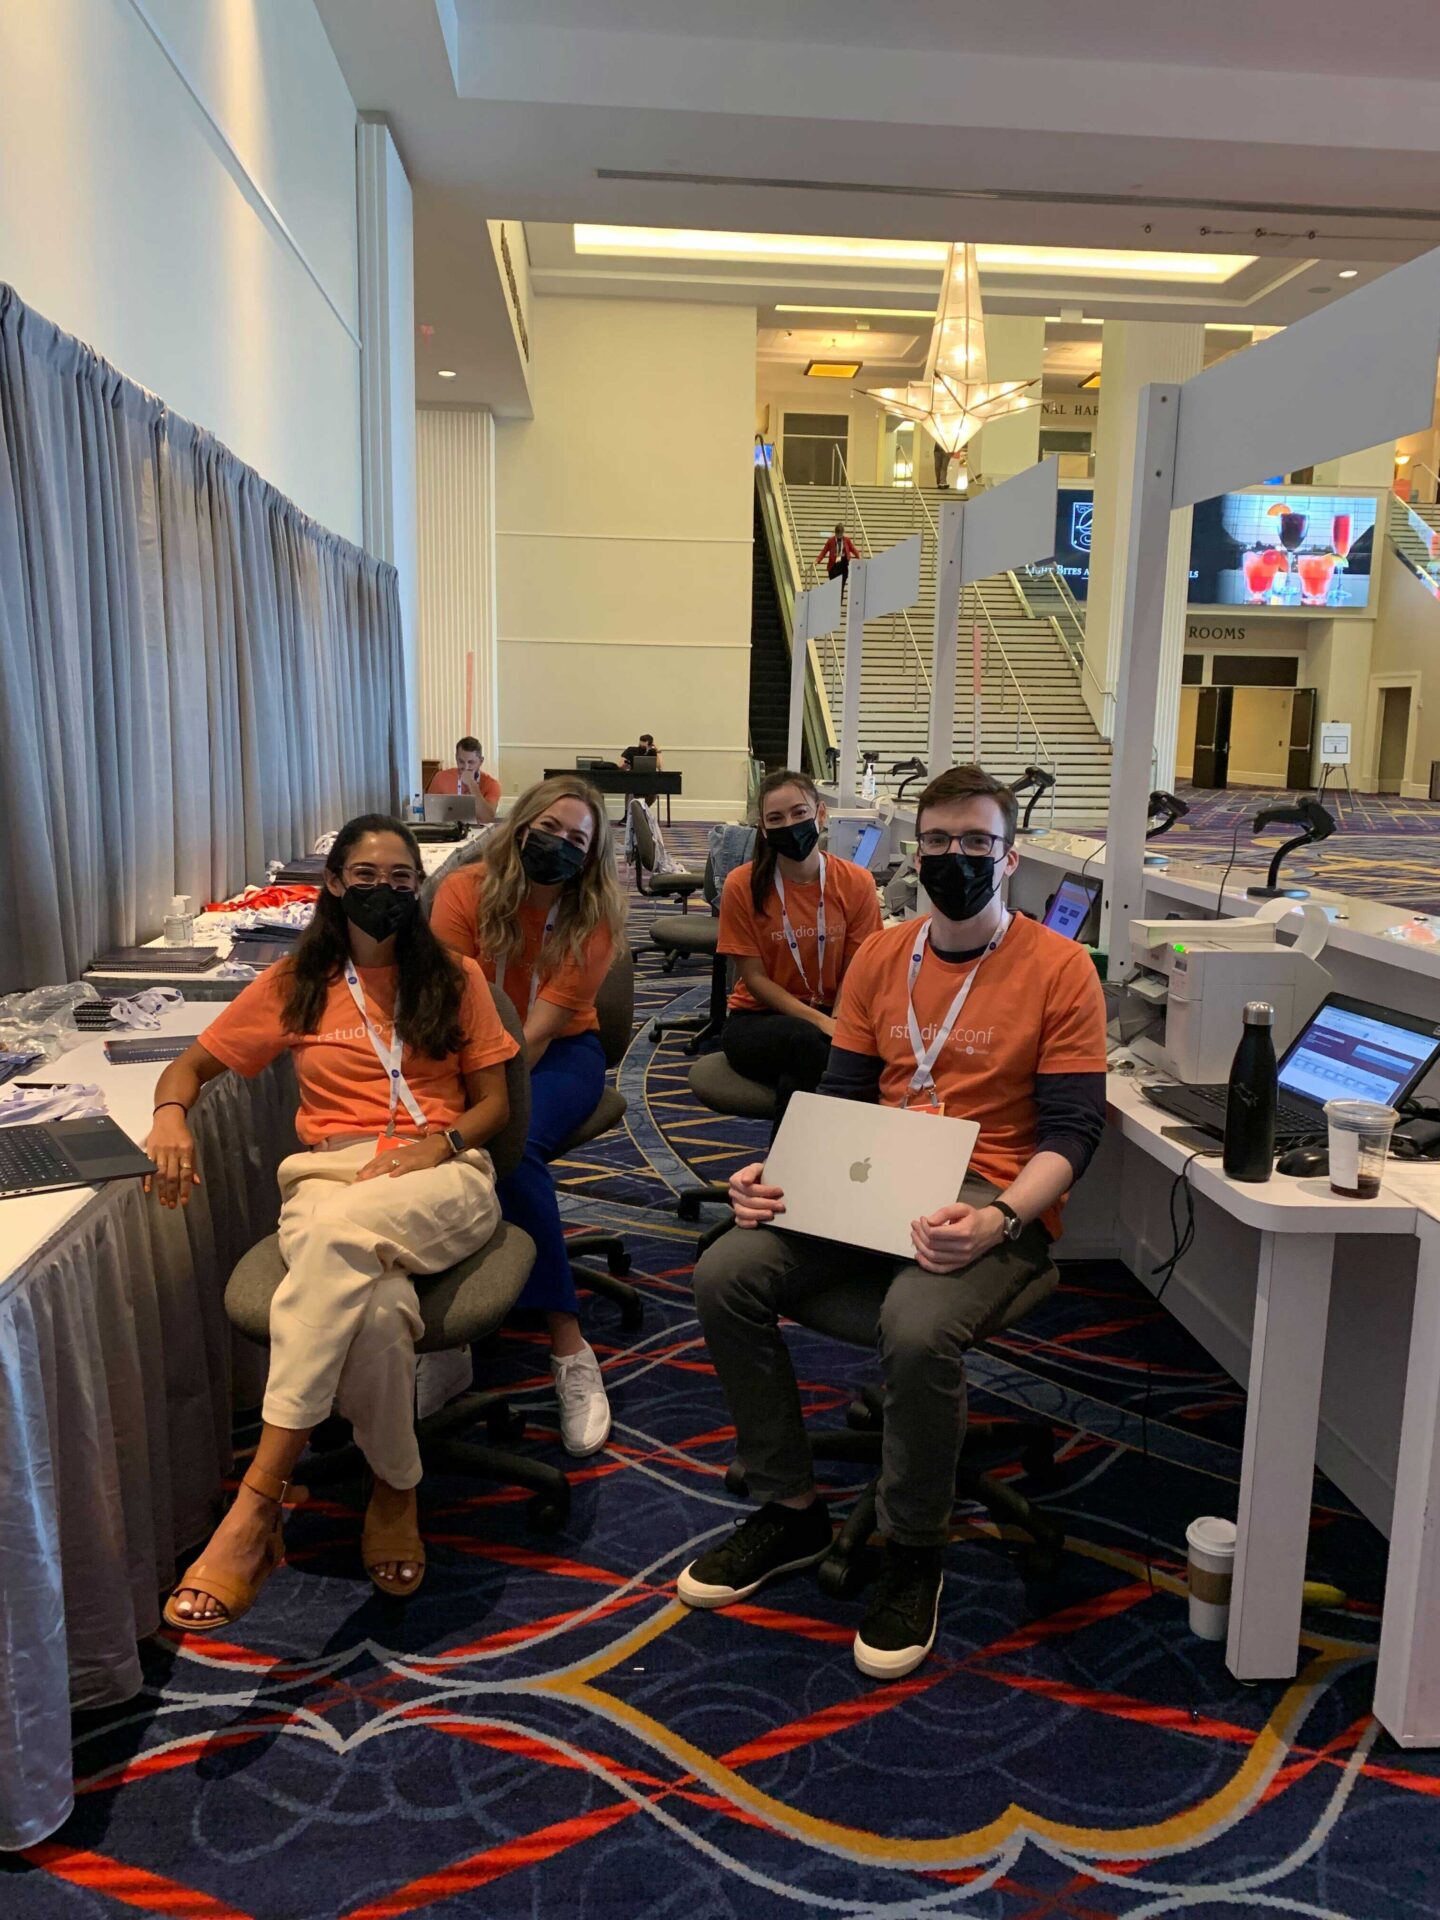 4 Posit employees in orange shirts at the registration area conf 2022